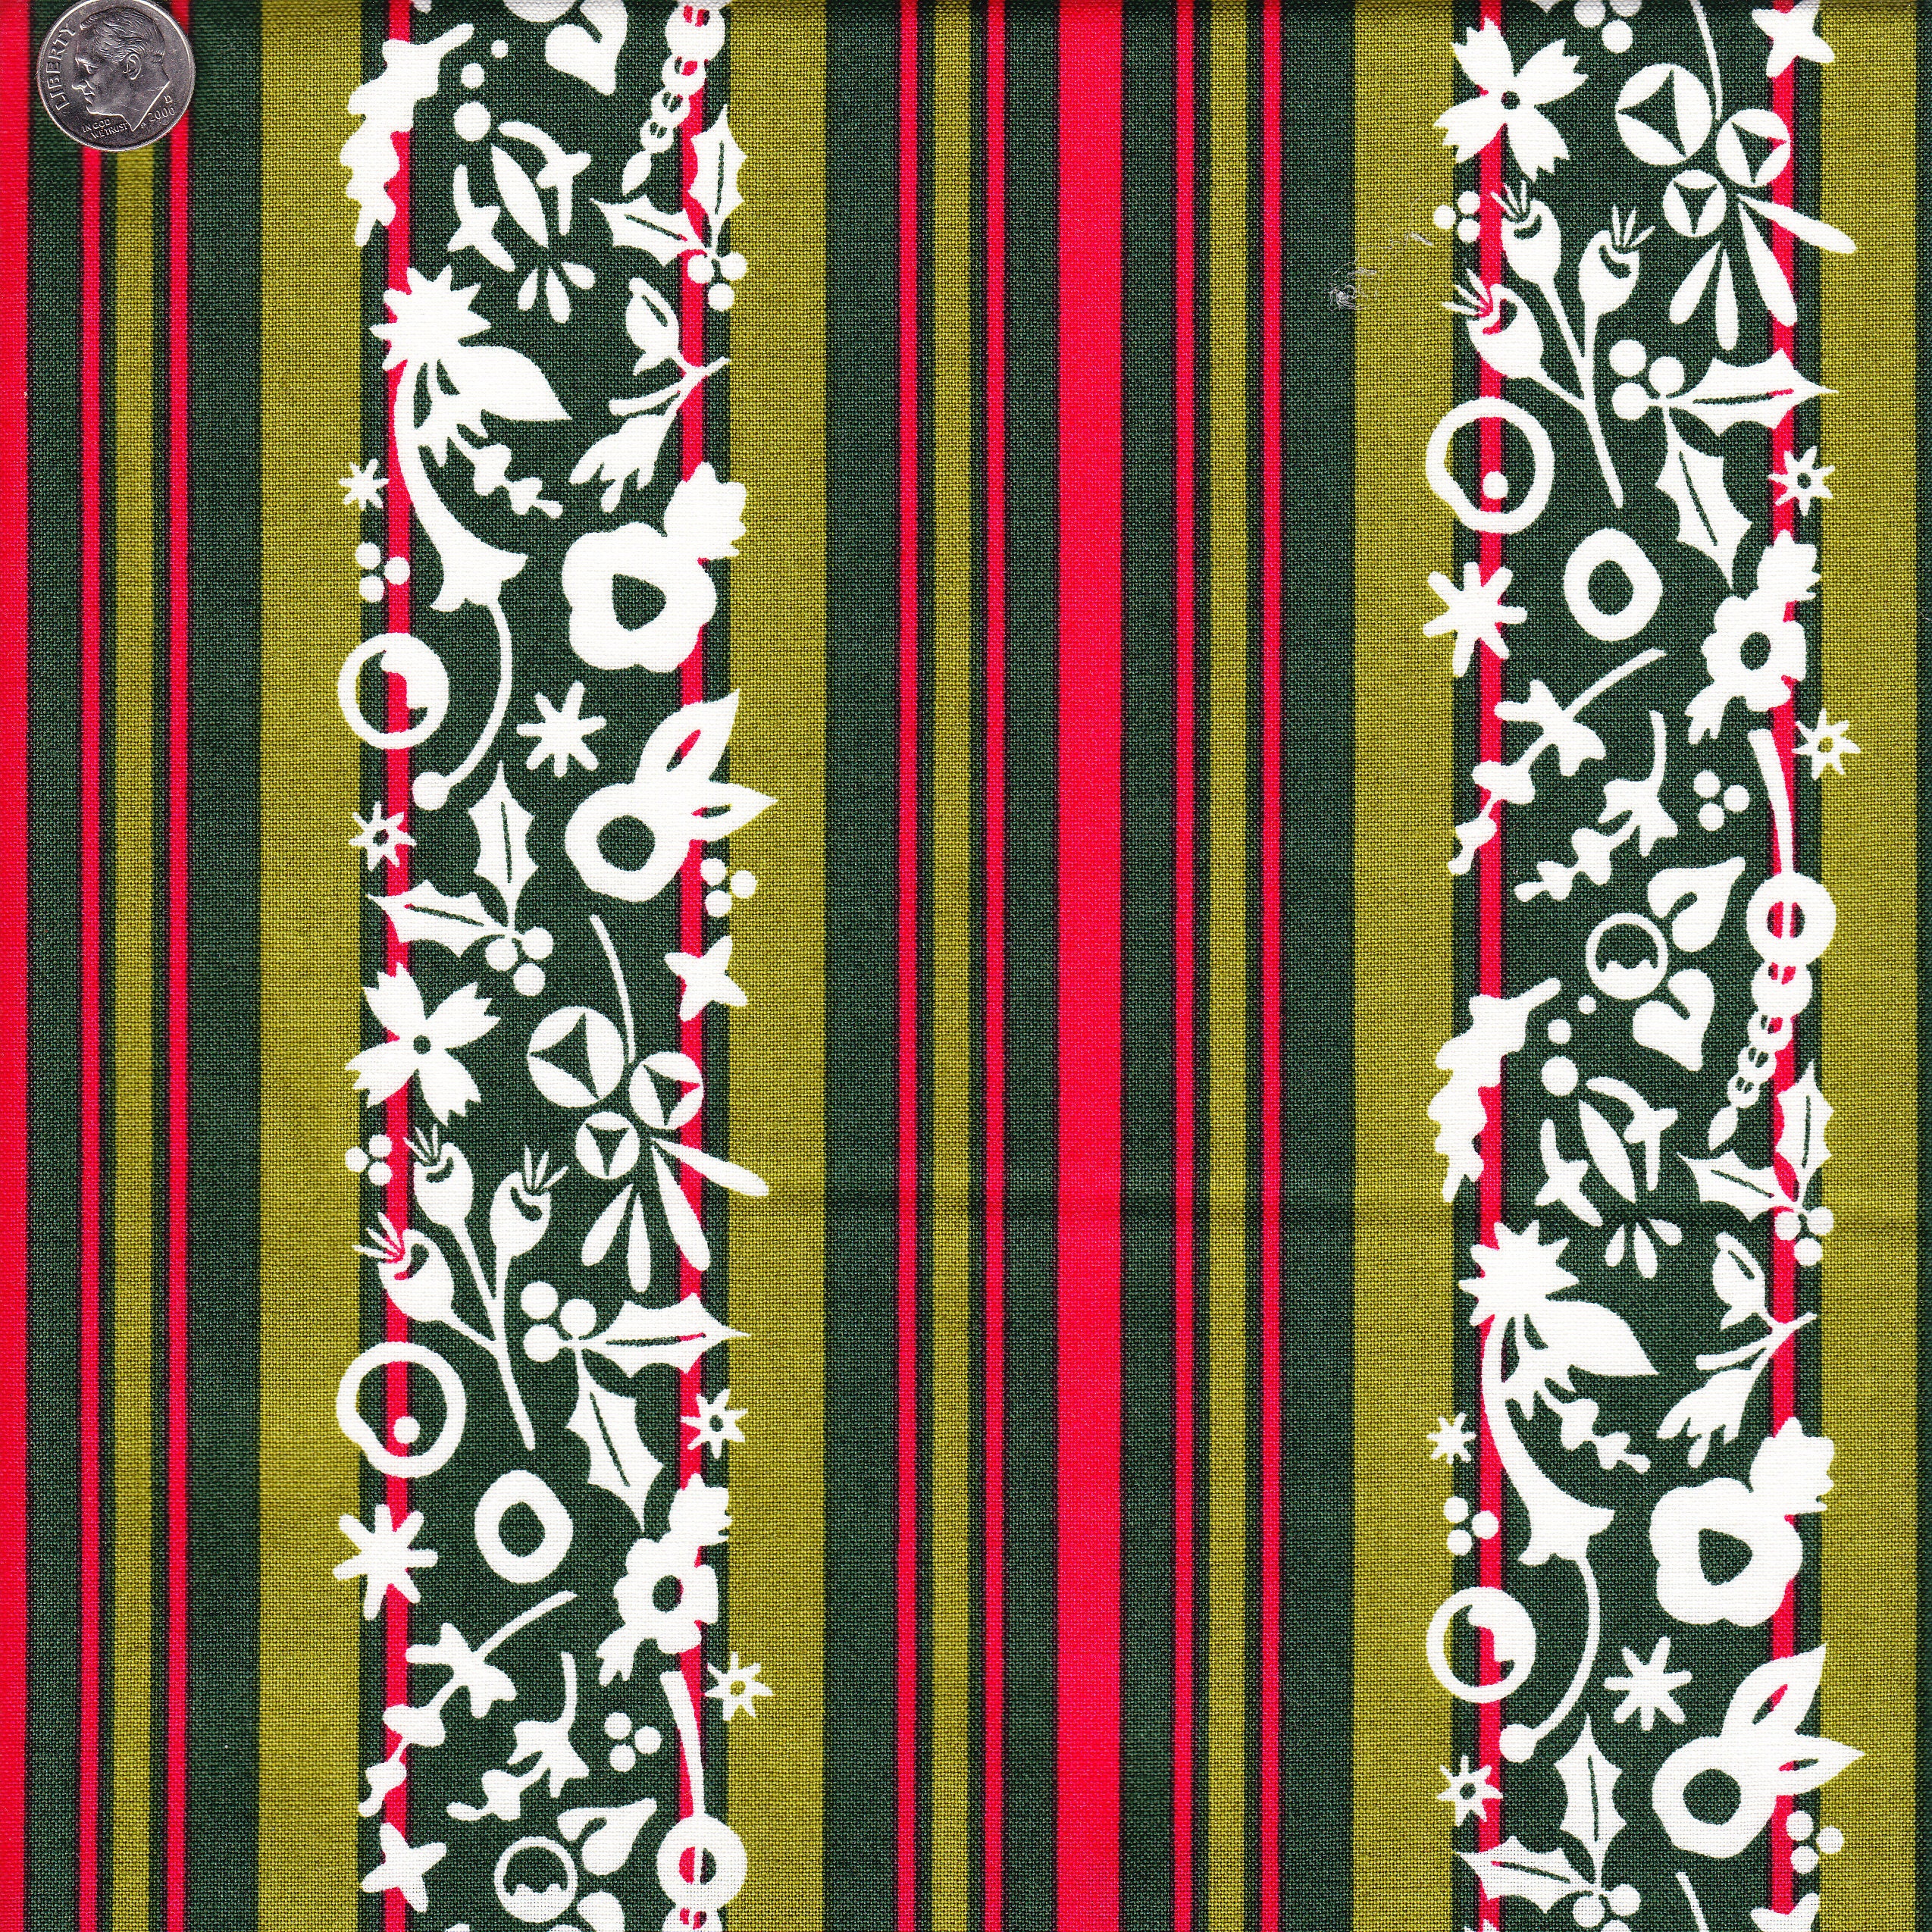 Sold by the Half Yard Alison Glass Holiday Stripe in image